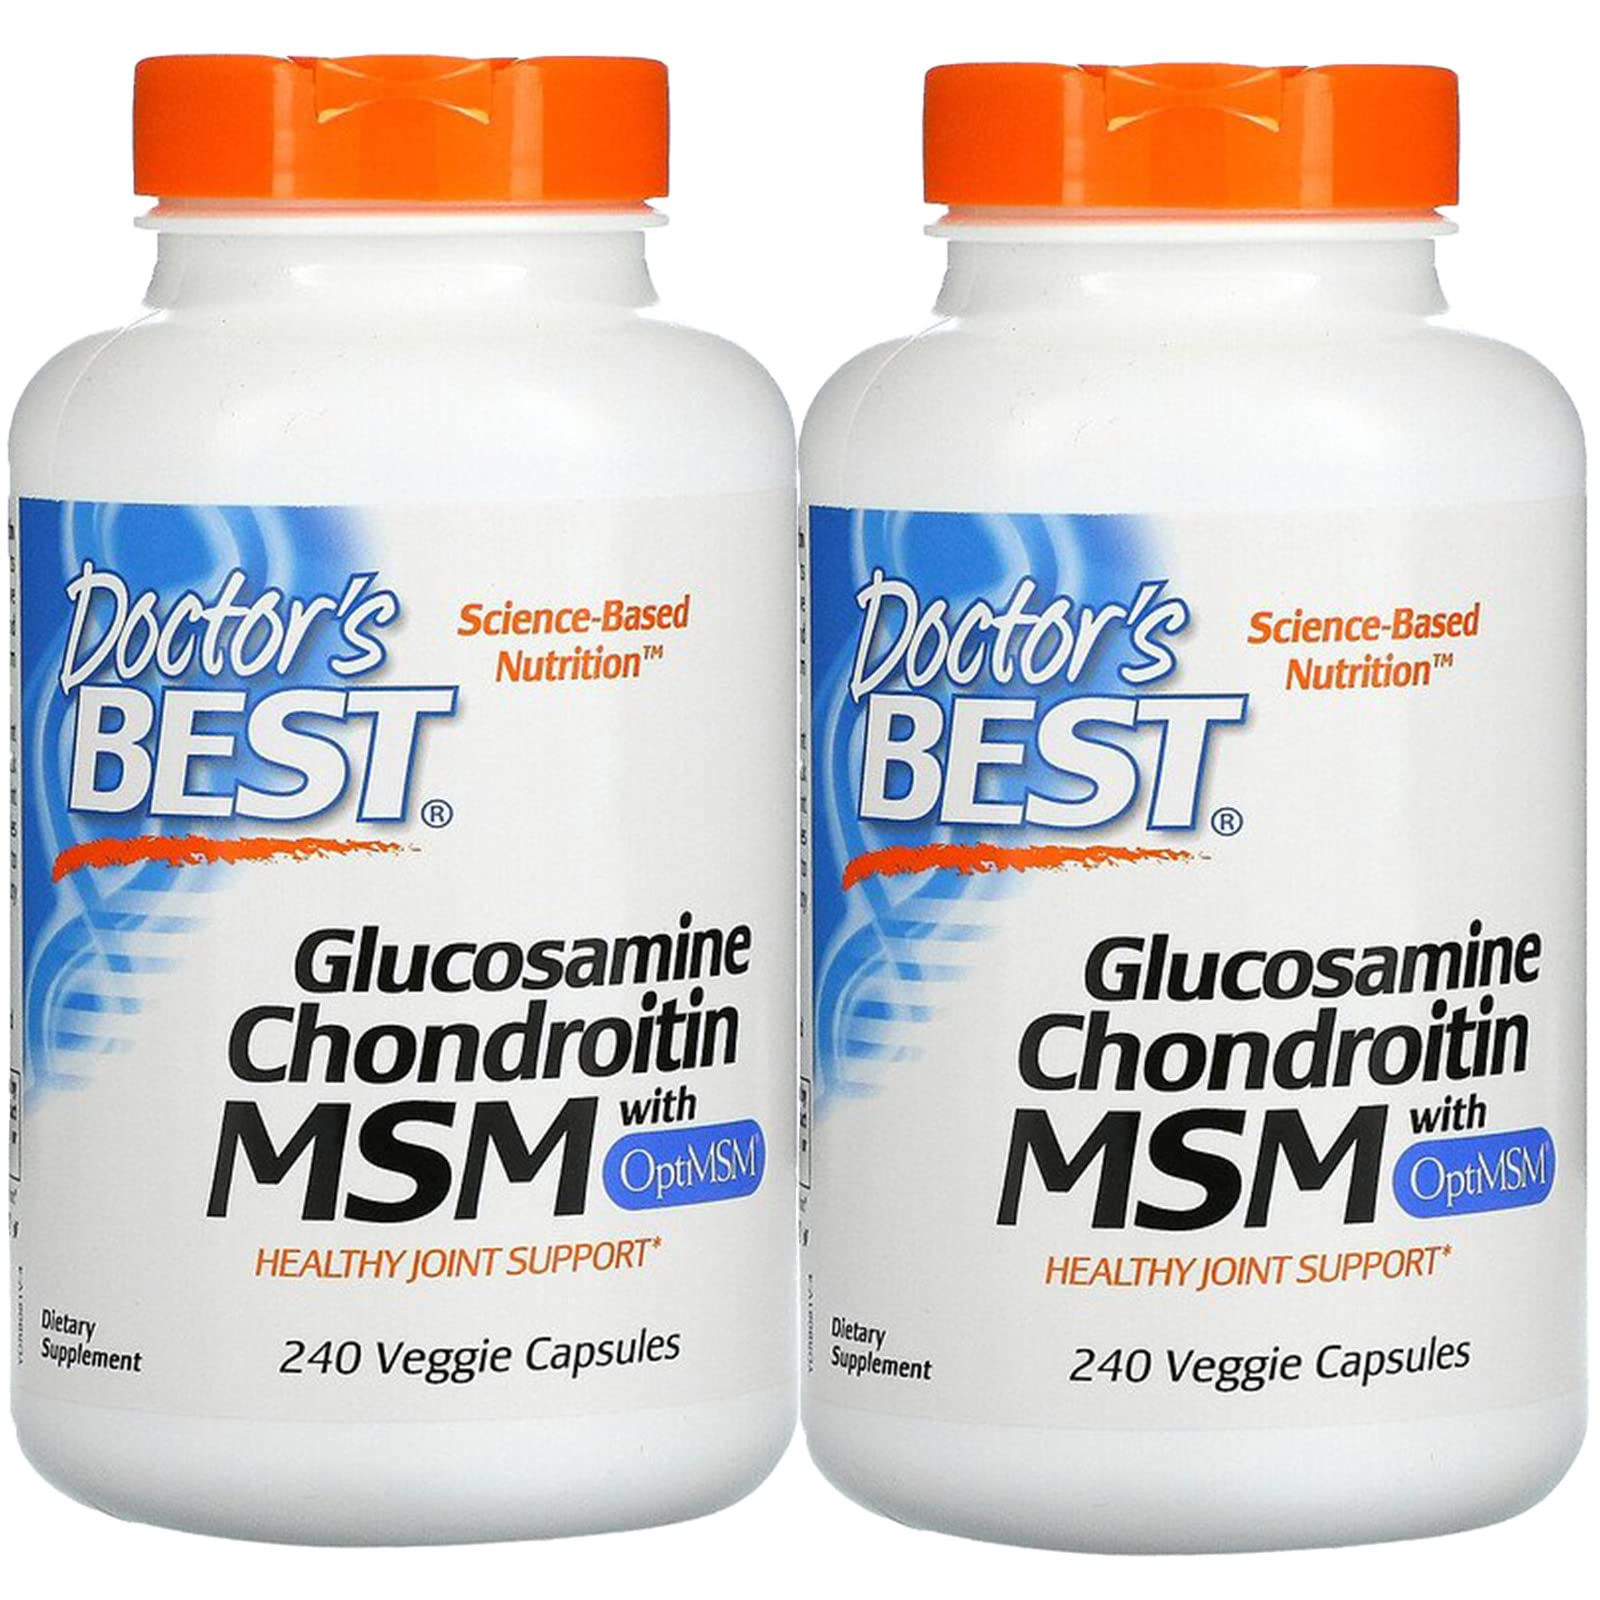 5 Best Glucosamine and Chondroitin Combination Products 10494